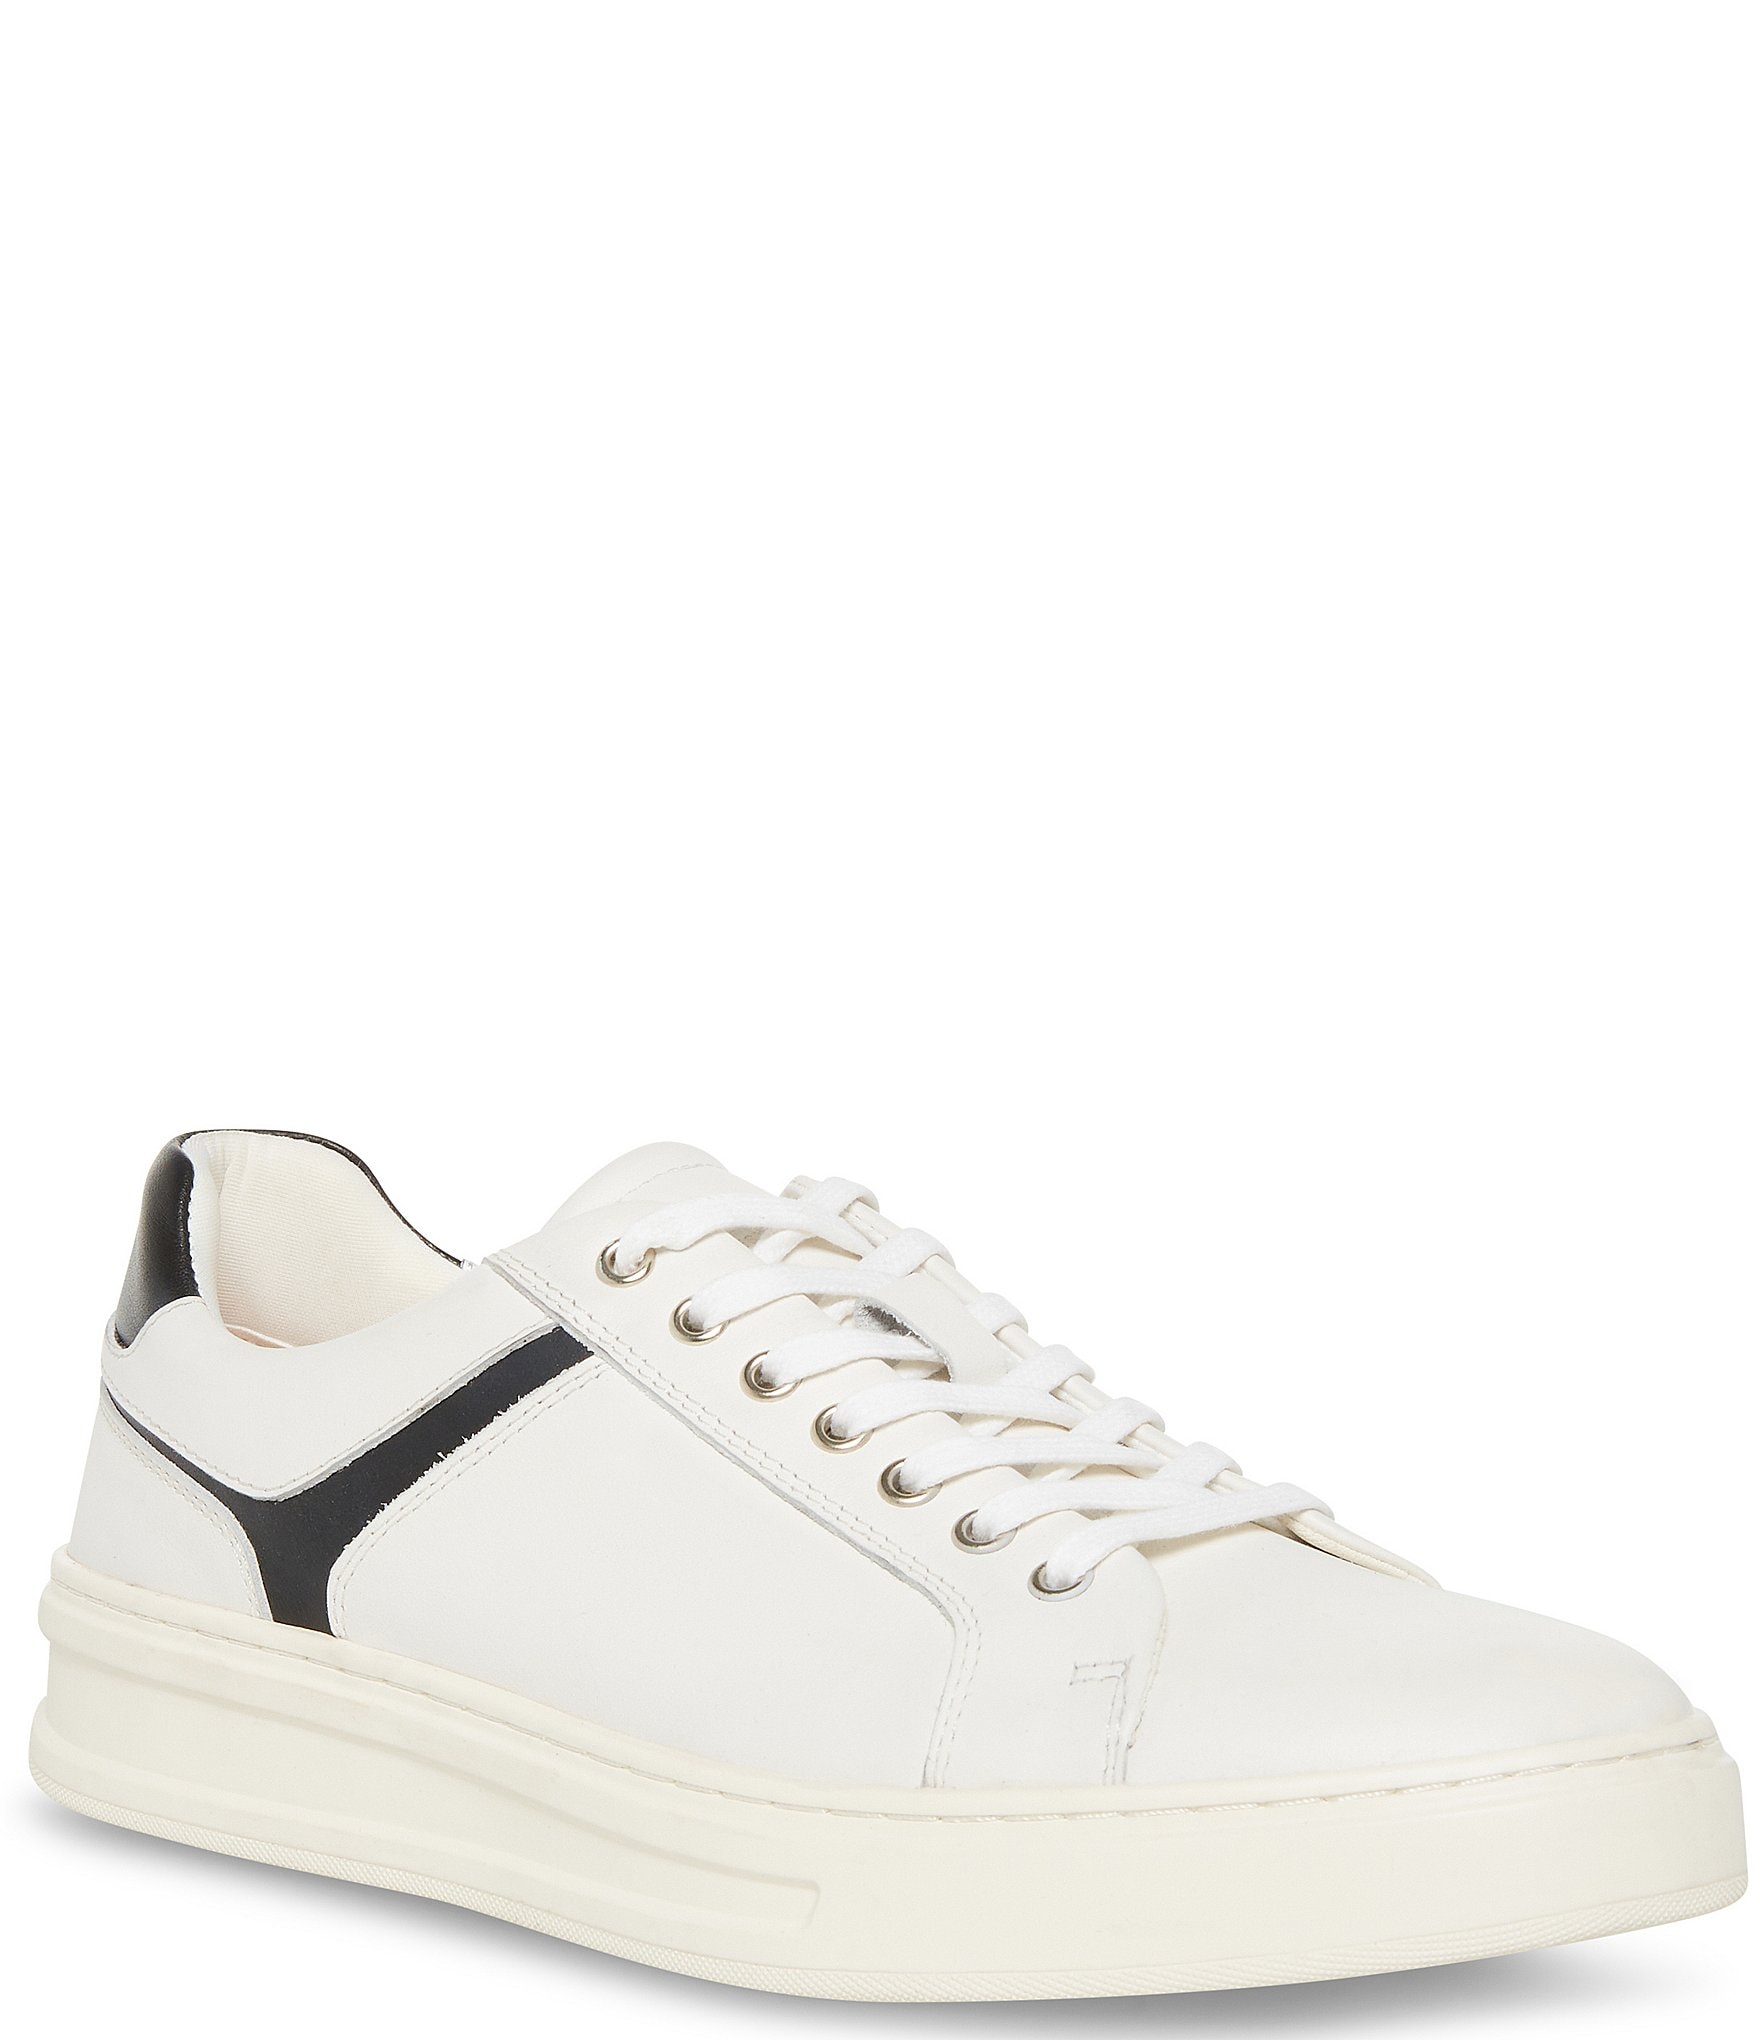 Steve Madden Men's McCord Leather Lace-Up Sneakers | Dillard's